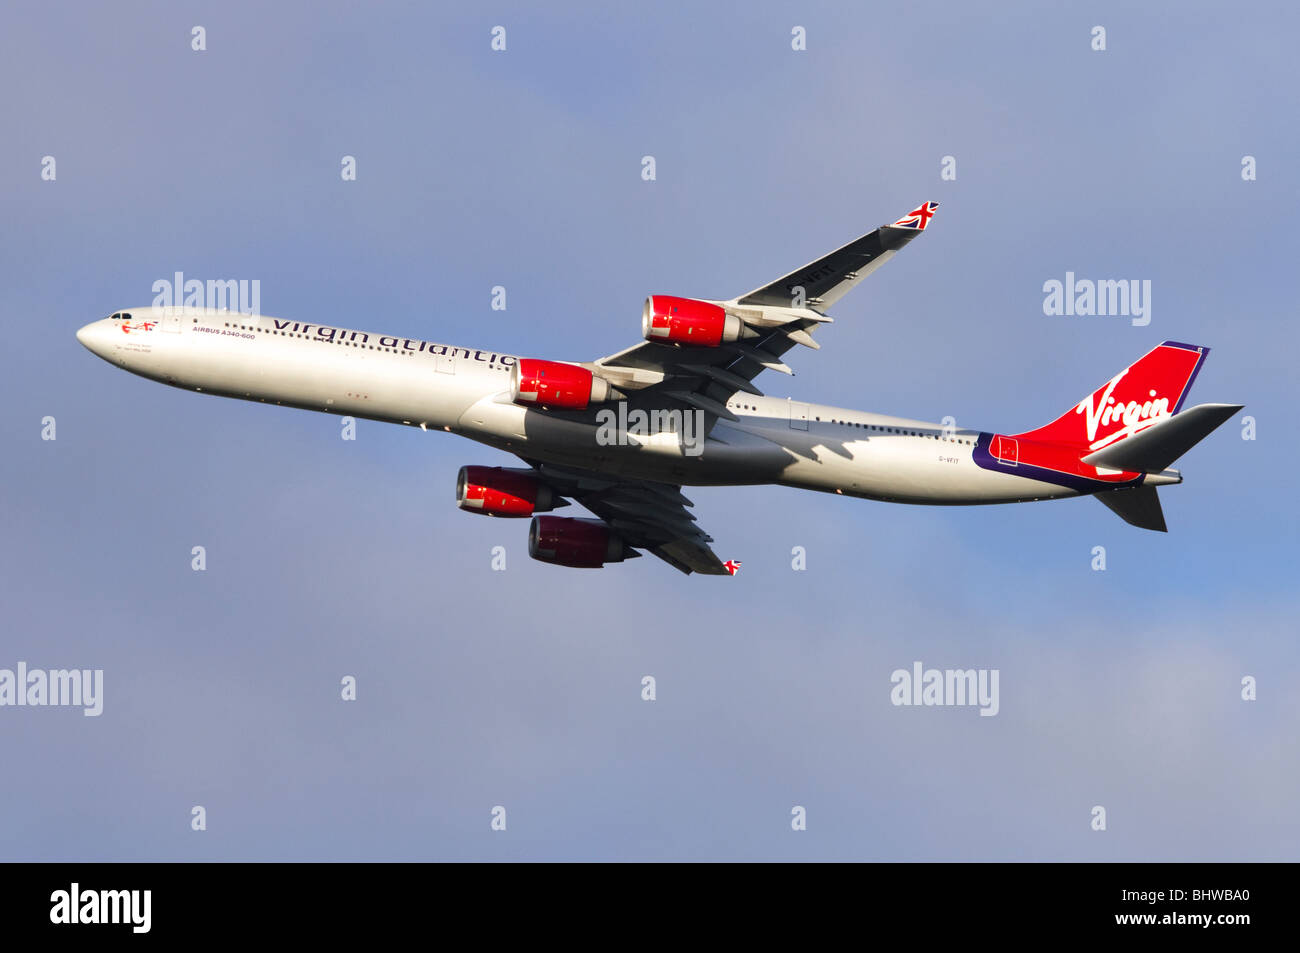 Airbus A340 operated by Virgin Atlantic climbing out from take off at London Heathrow Airport Stock Photo